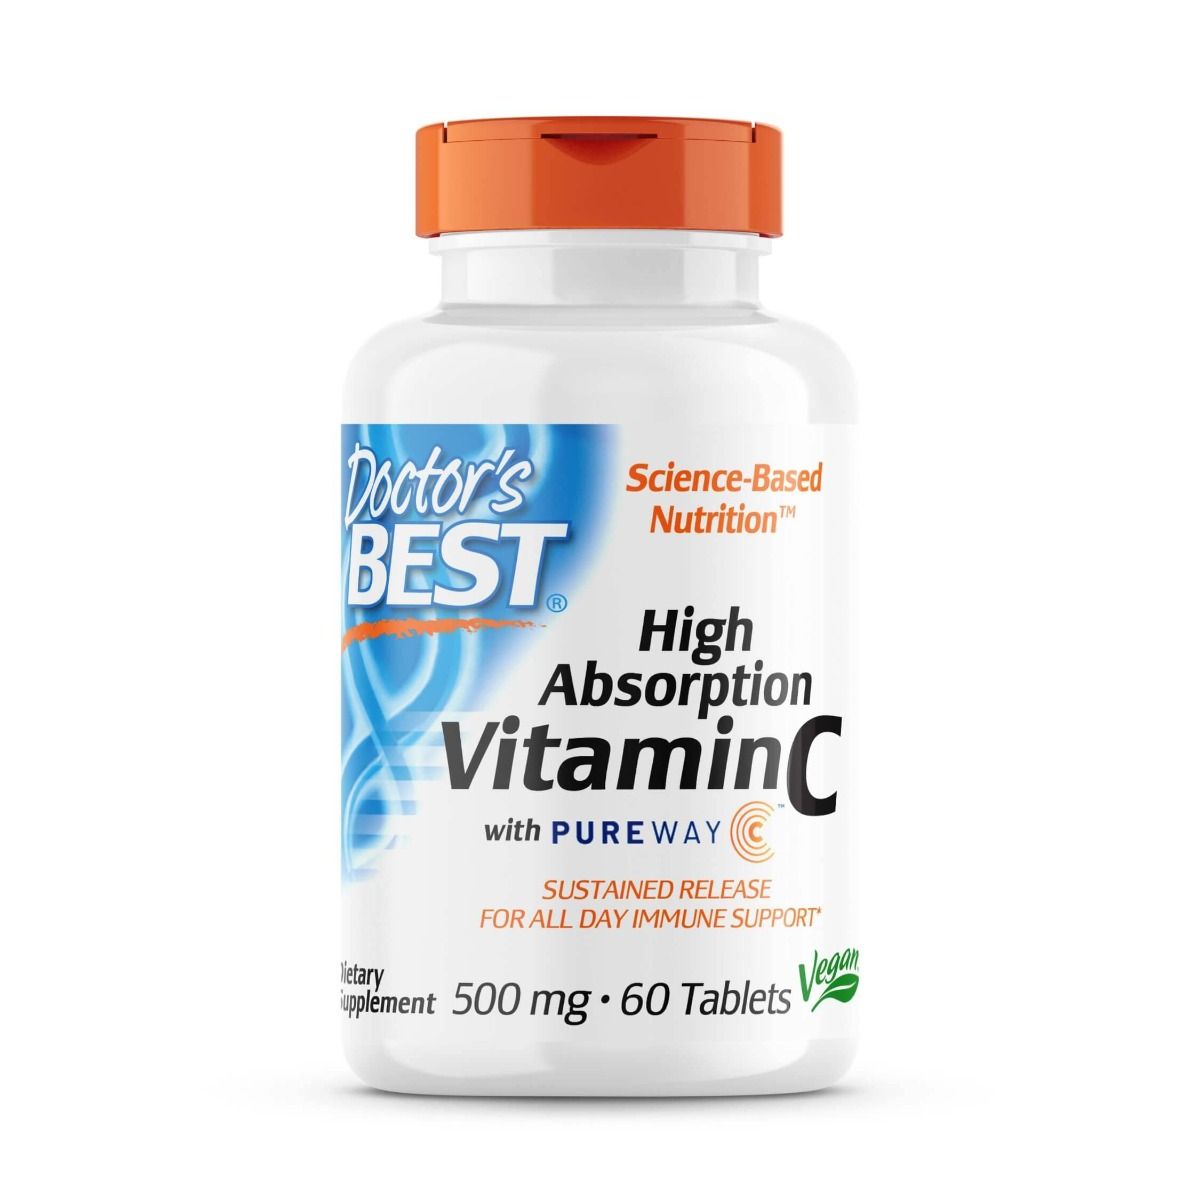 Photos - Vitamins & Minerals Doctors Best Doctor's Best High Absorption Vitamin C with PureWay-C 500 mg 60 Tablets P 